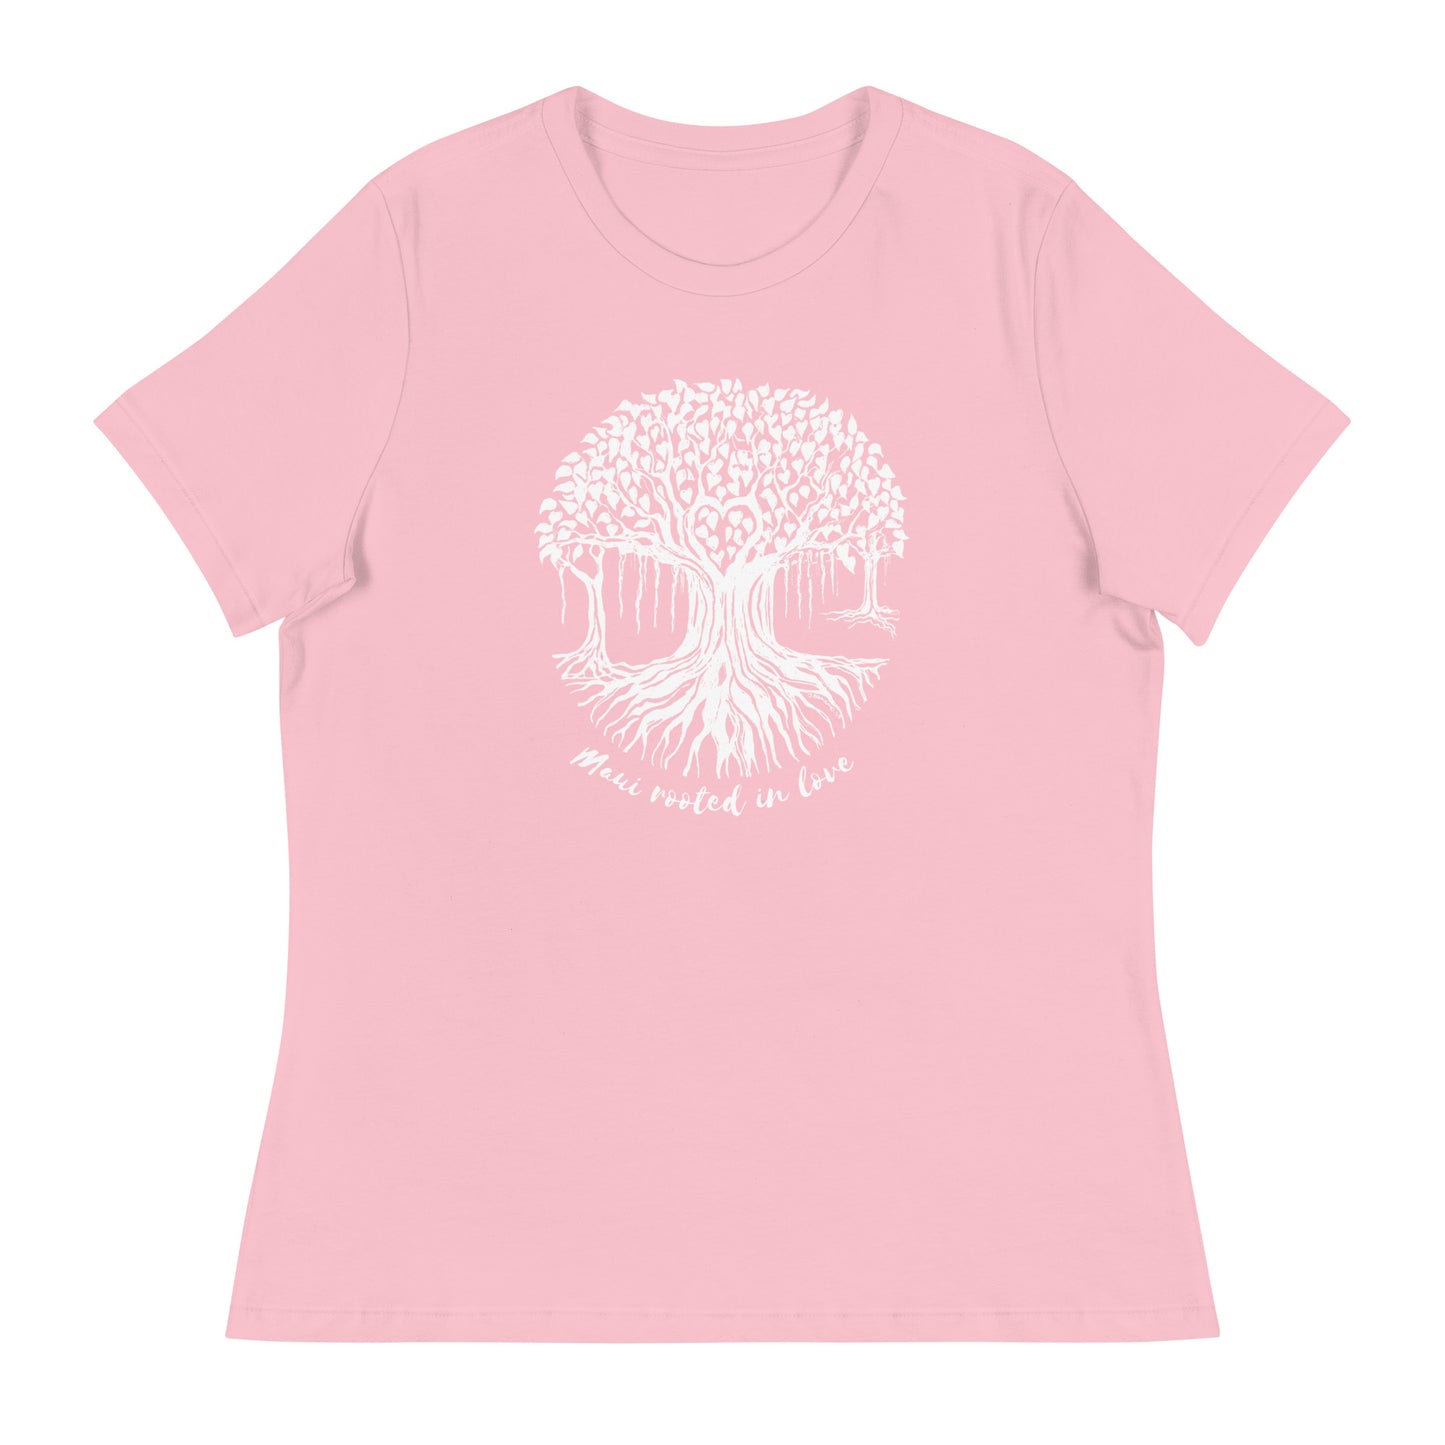 Women's Relaxed T-Shirt with Maui Banyan Tree